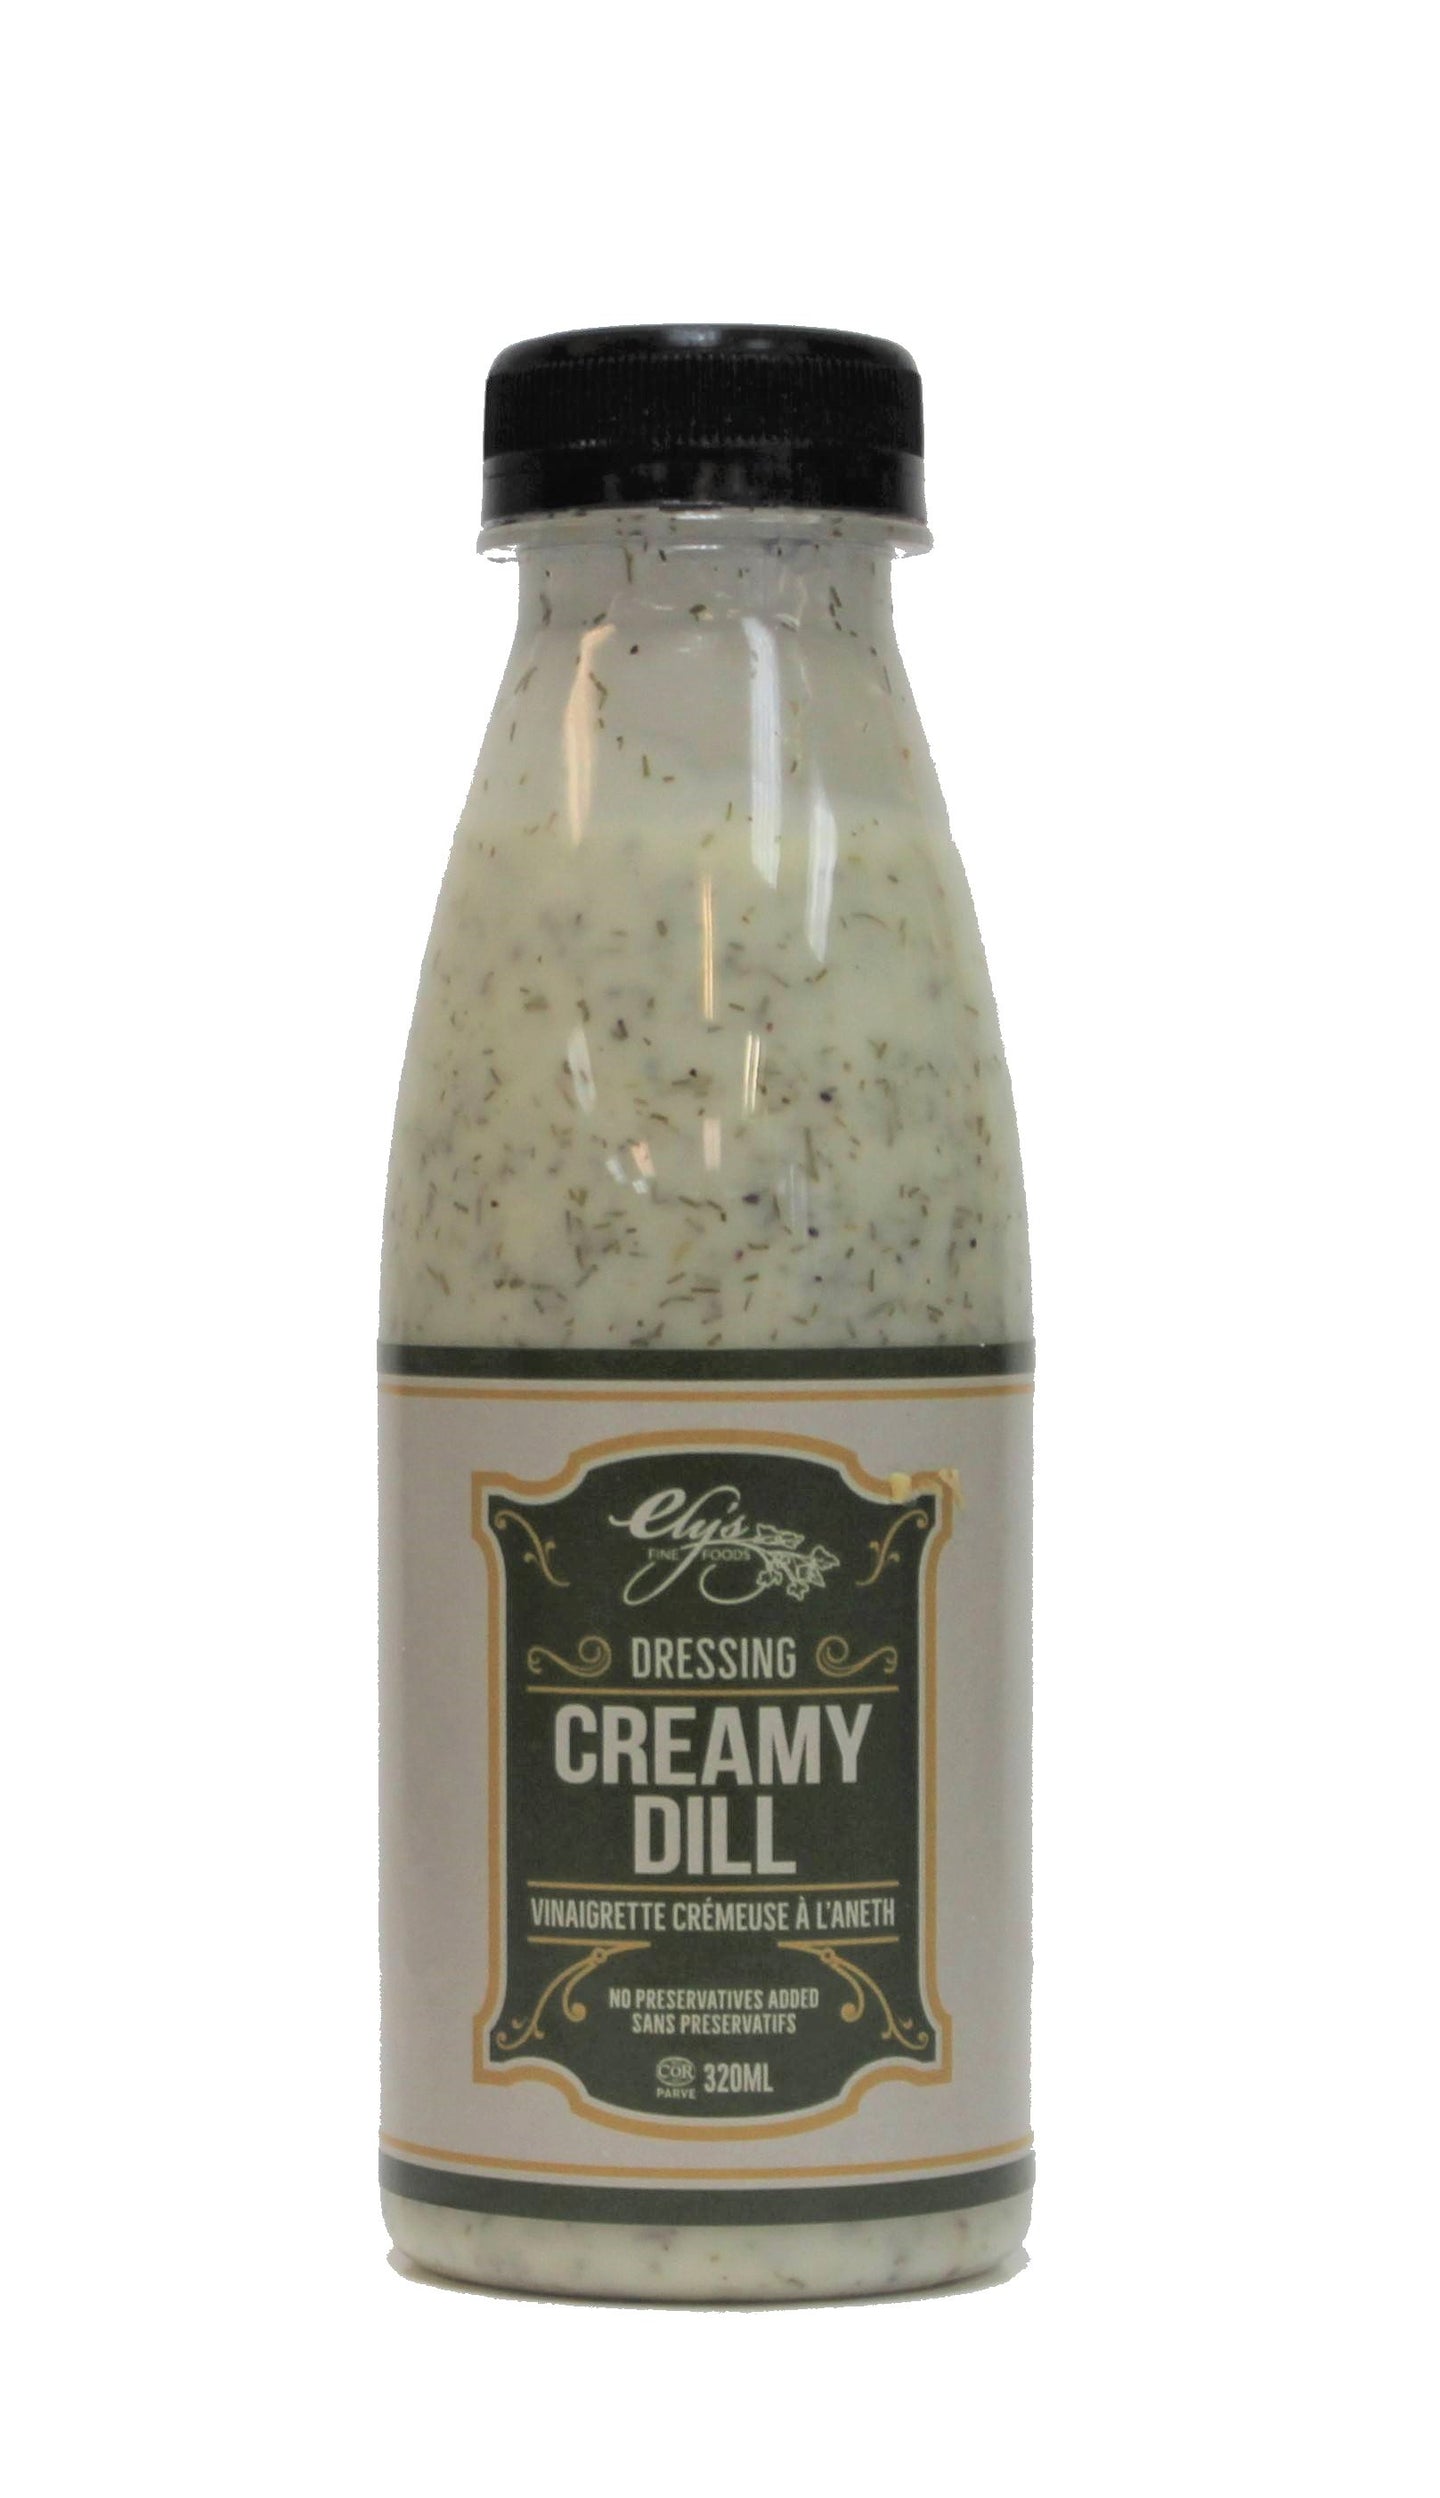 Creamy Dill Salad Dressing made by Ely's Fine Foods in Toronto